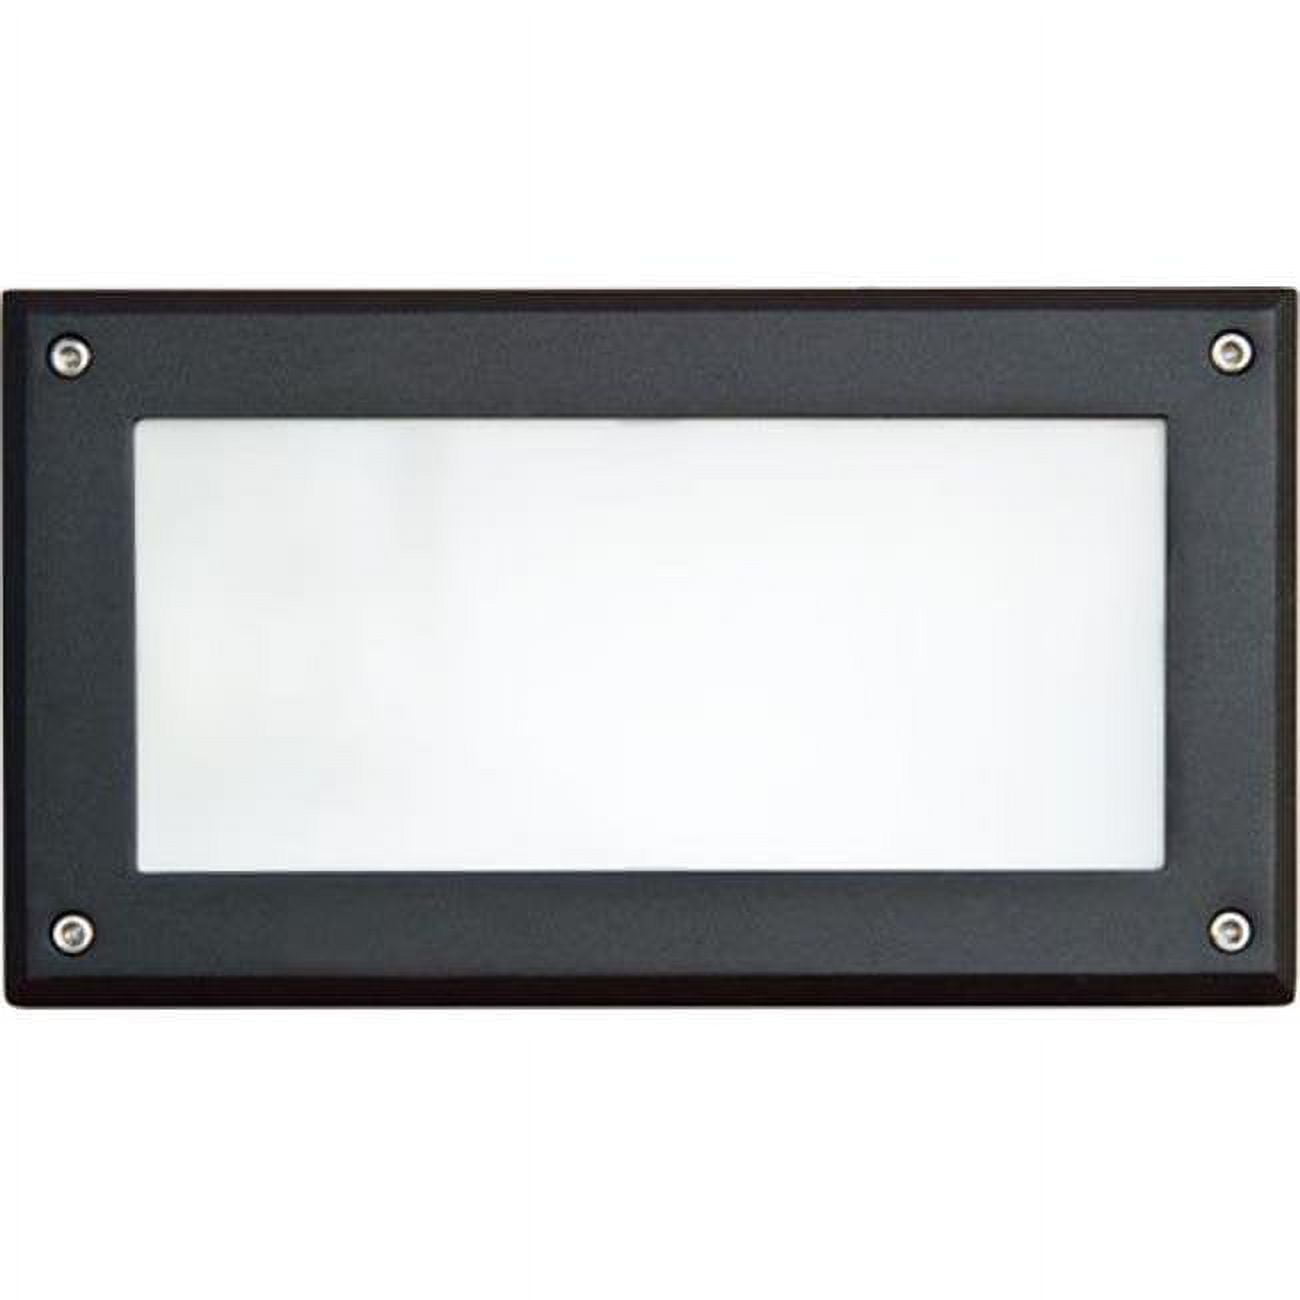 Recessed Open Face Brick, Step & Wall Light - 9w 120v, Black